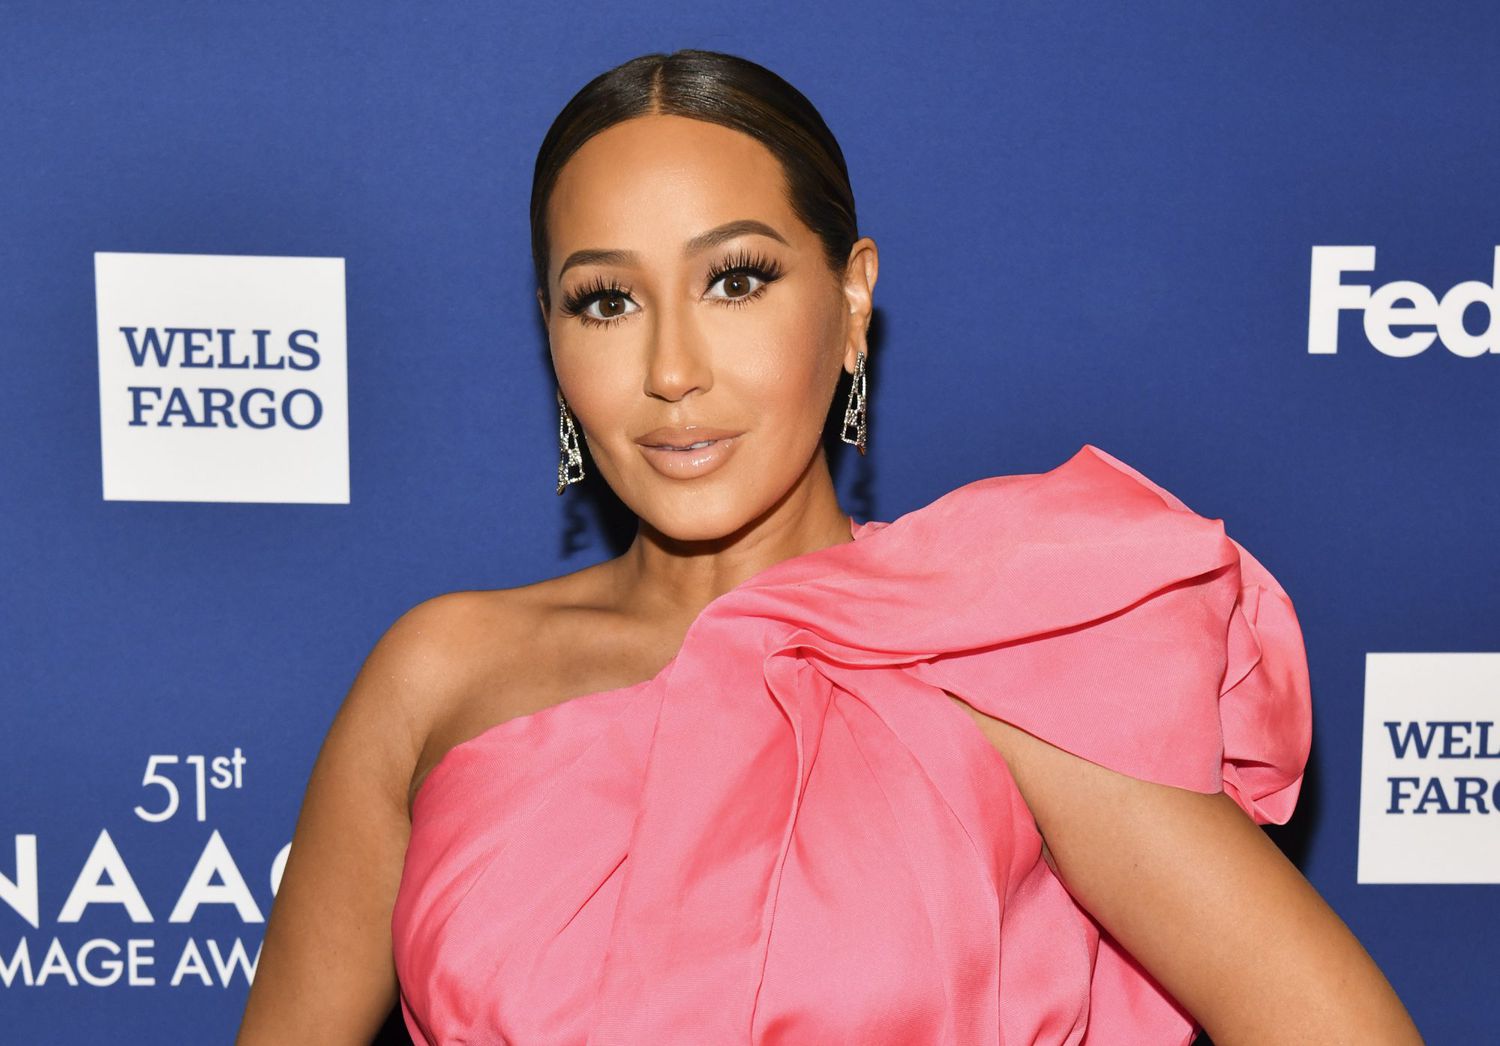 Adrienne Bailon at the 51st NAACP Image Awards Nominees Luncheon